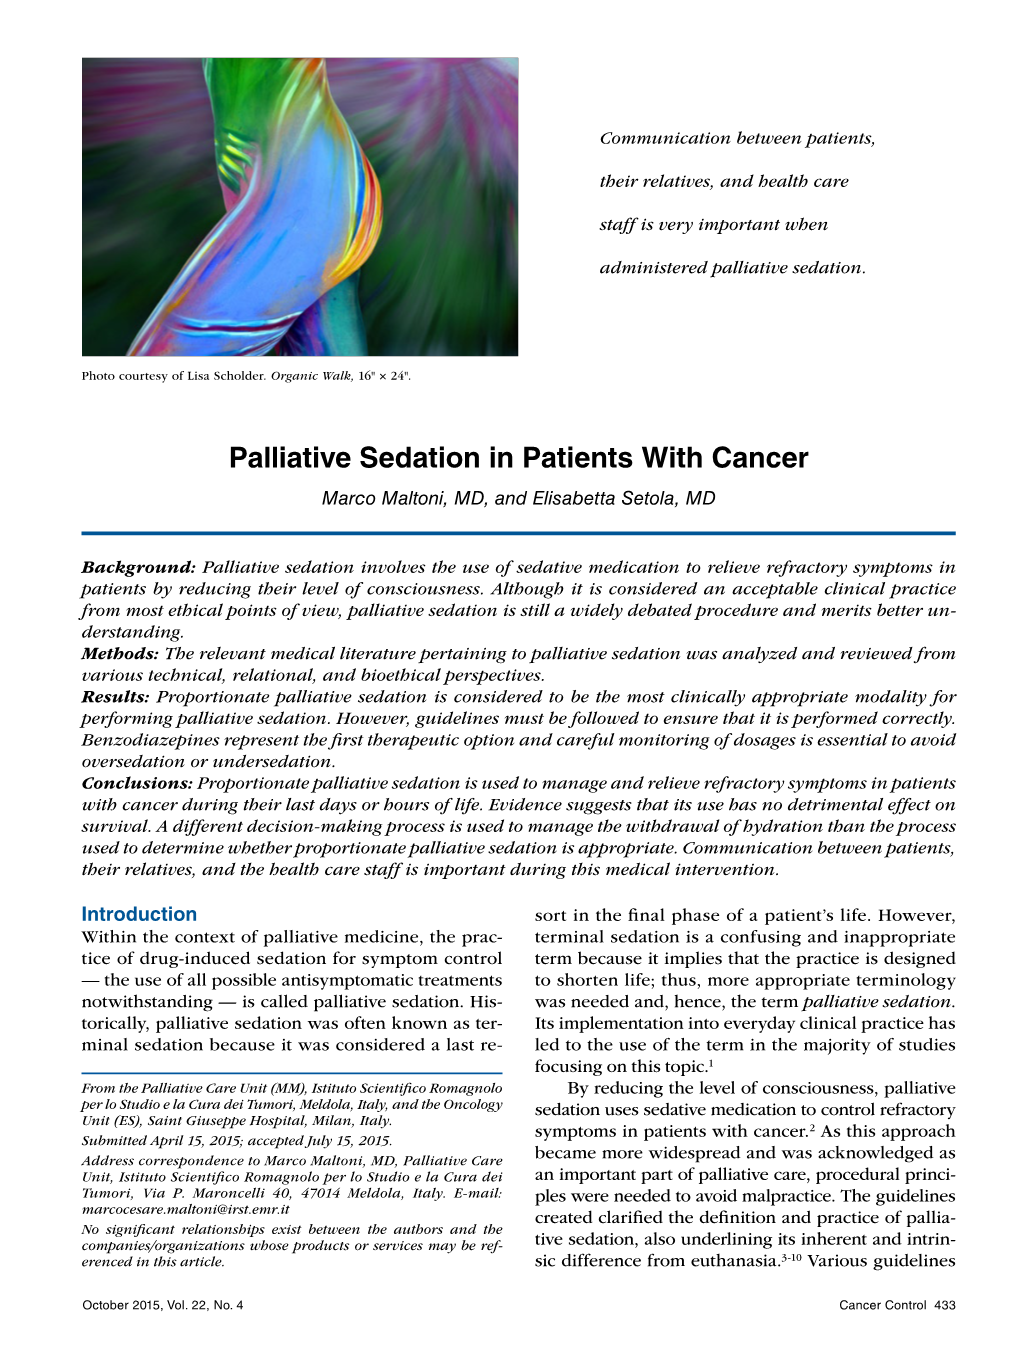 Palliative Sedation in Patients with Cancer Marco Maltoni, MD, and Elisabetta Setola, MD